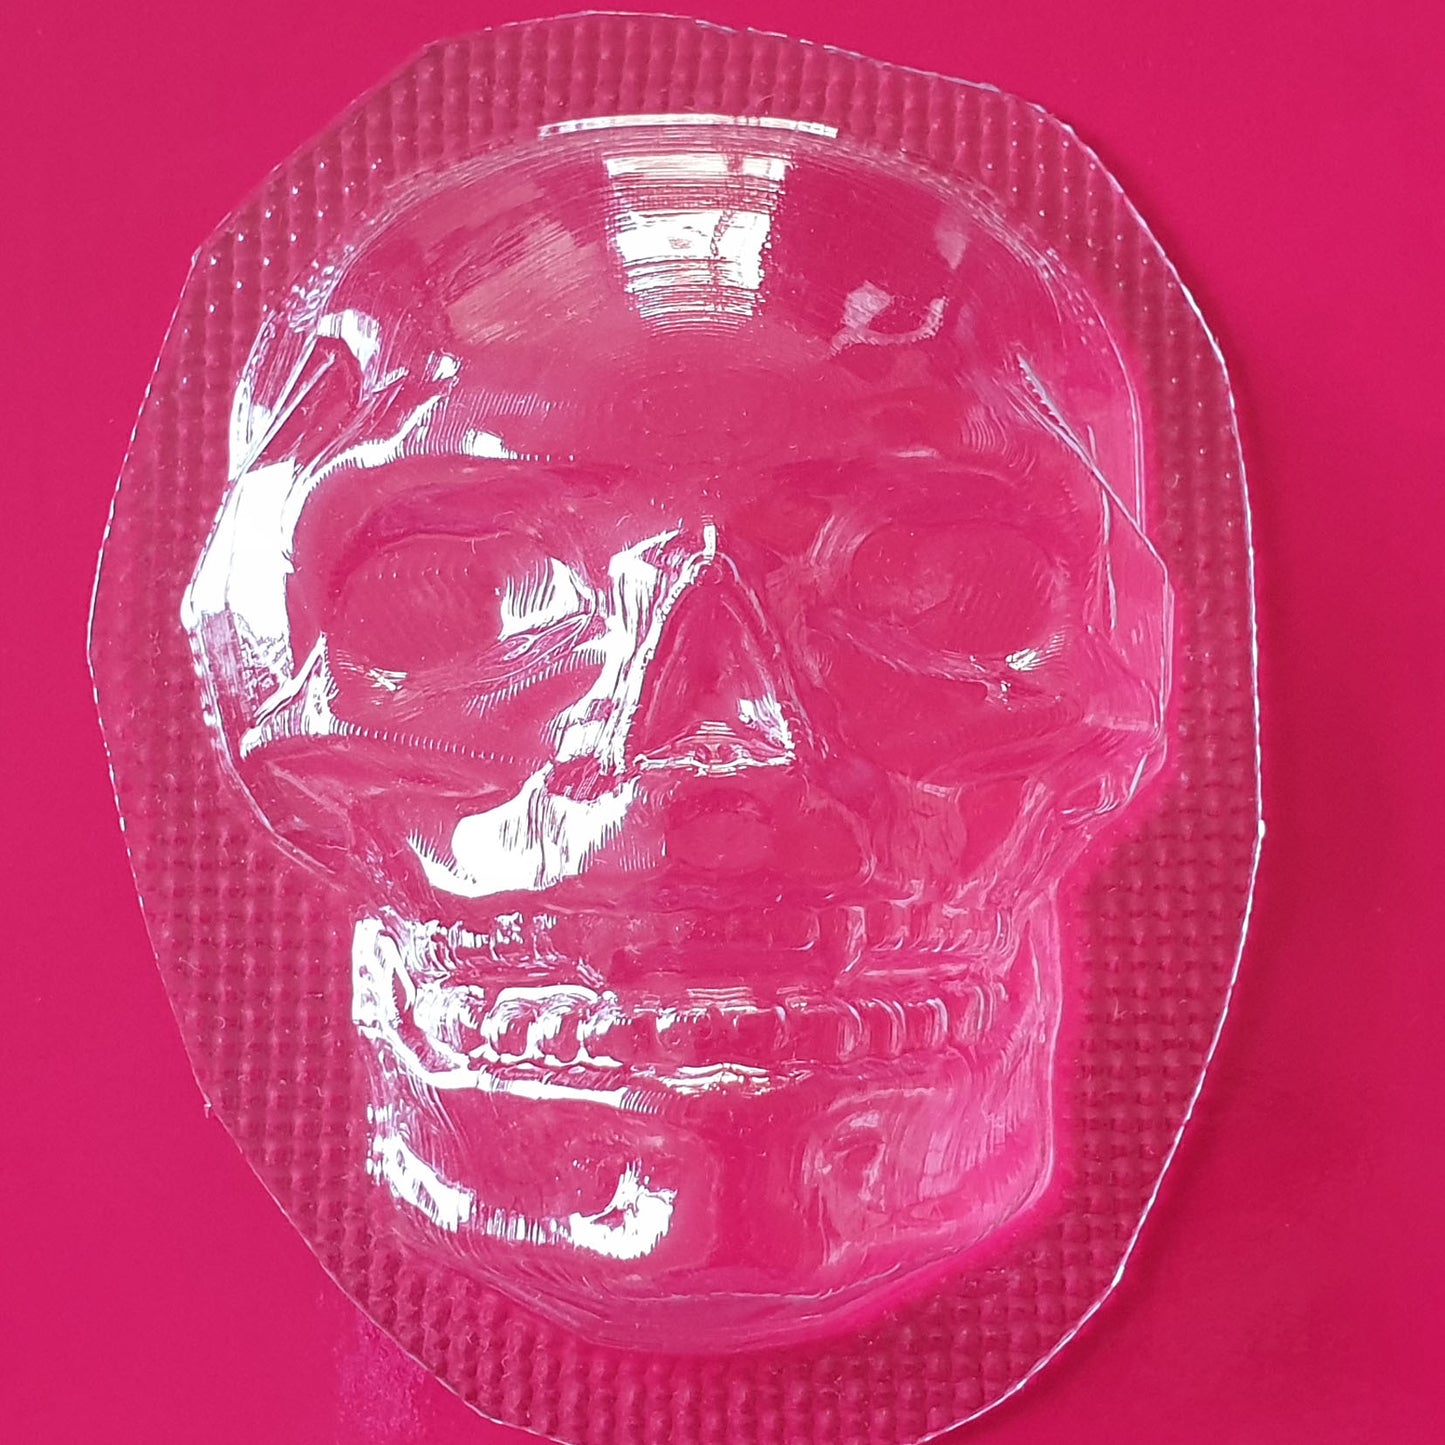 Skull Mould | Truly Personal | Bath Bomb, Soap, Resin, Chocolate, Jelly, Wax Melts Mold